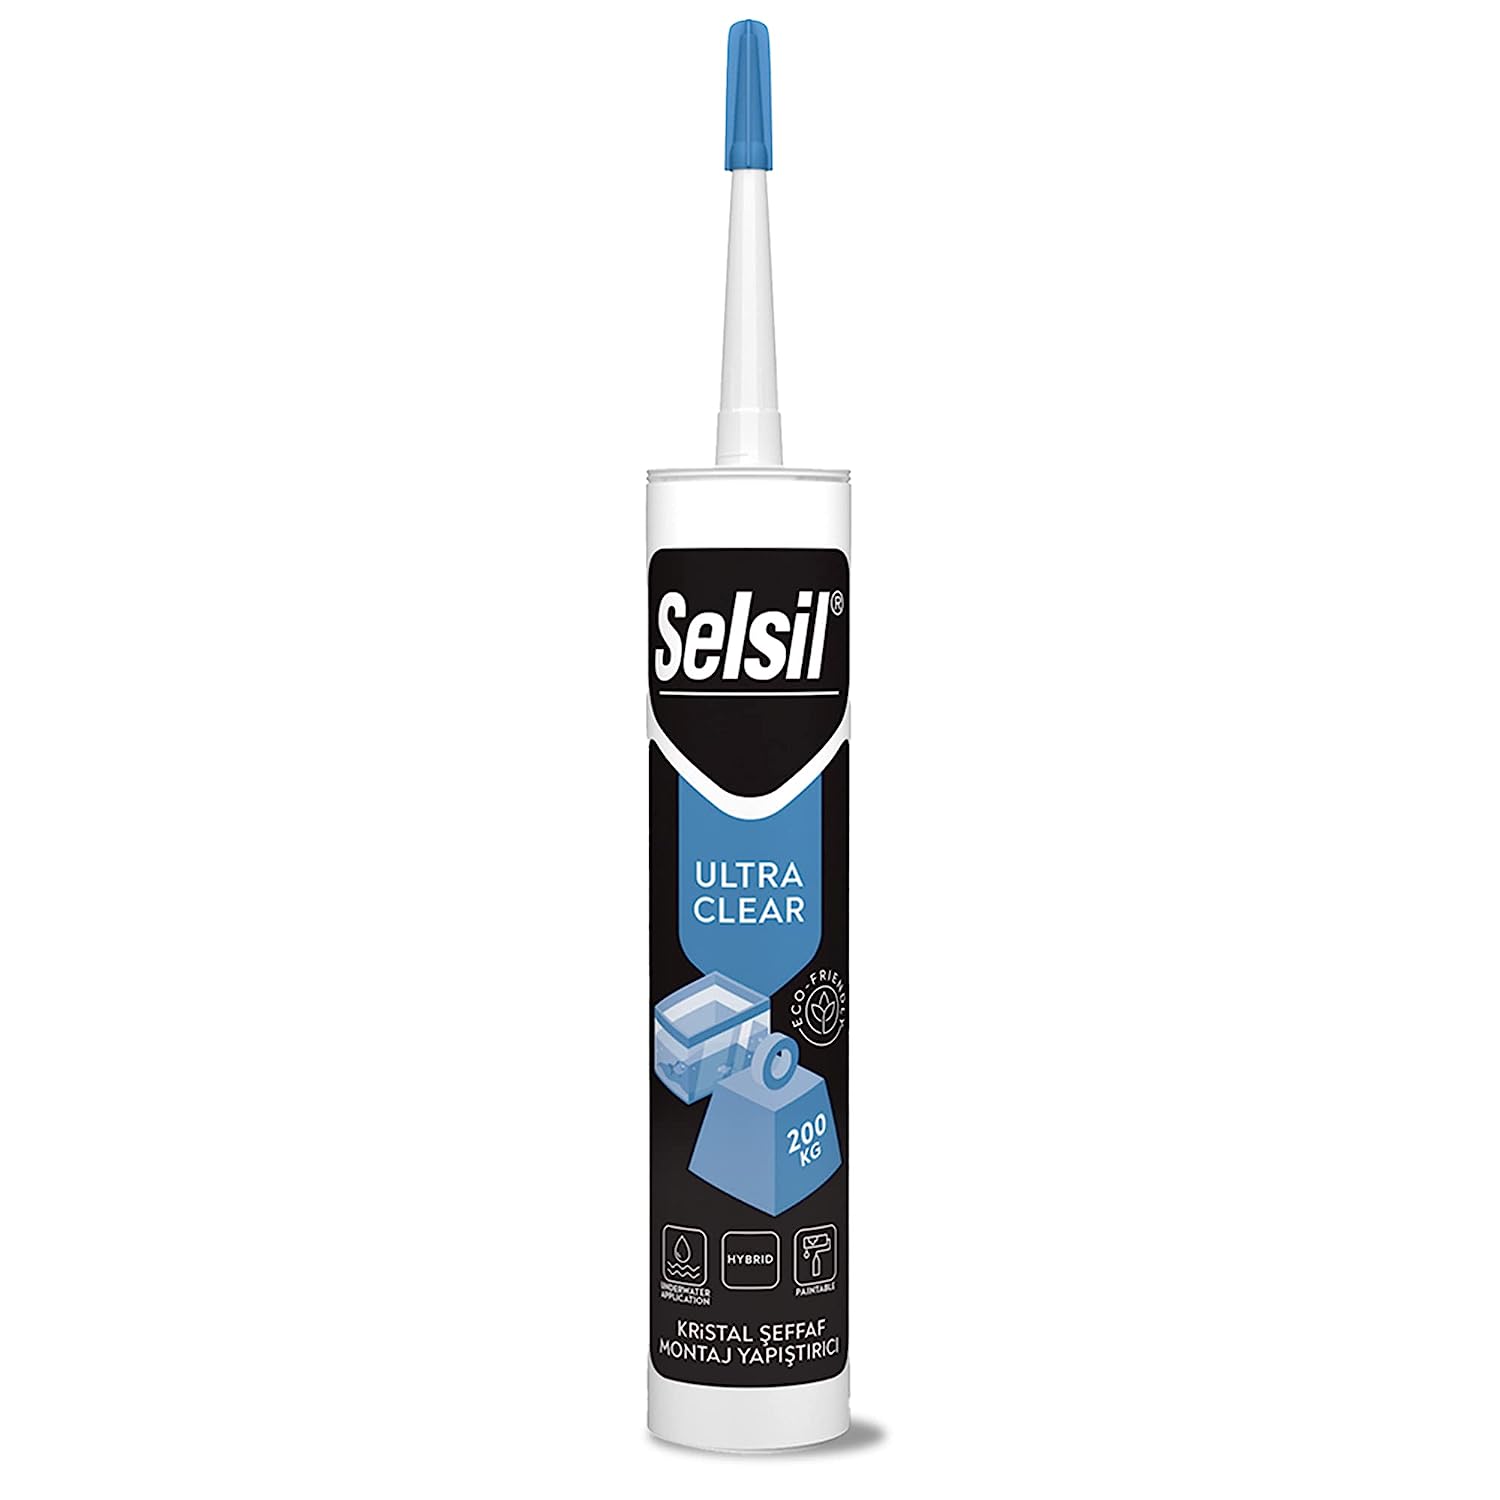 SELSIL Ultra Crystal Clear Mounting Adhesive & Sealant [...]